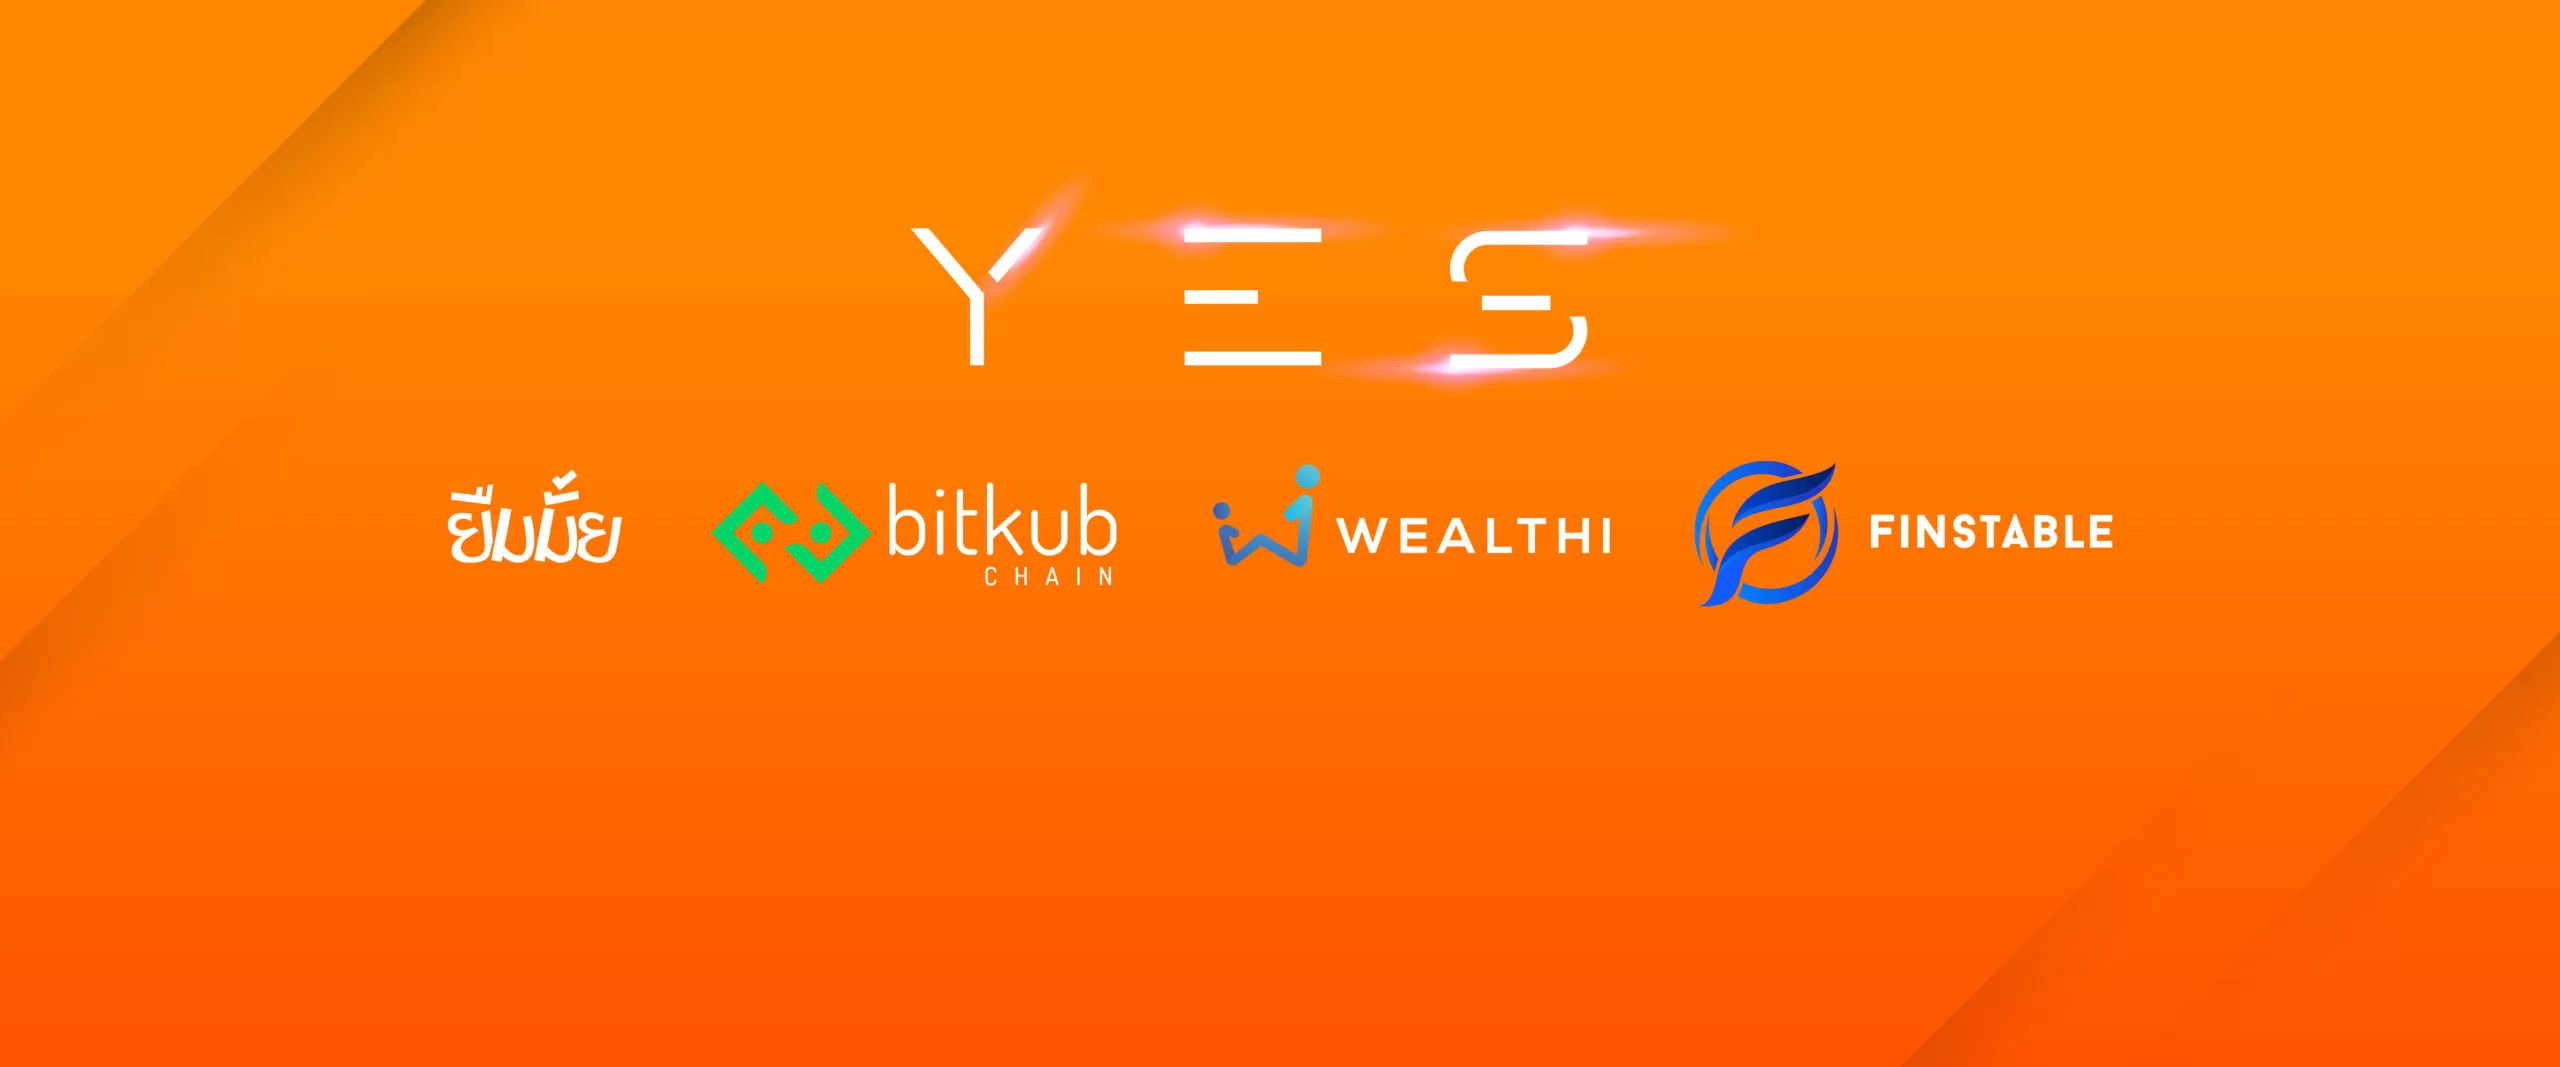 YES-Backdrop-2304x960-px-2-03